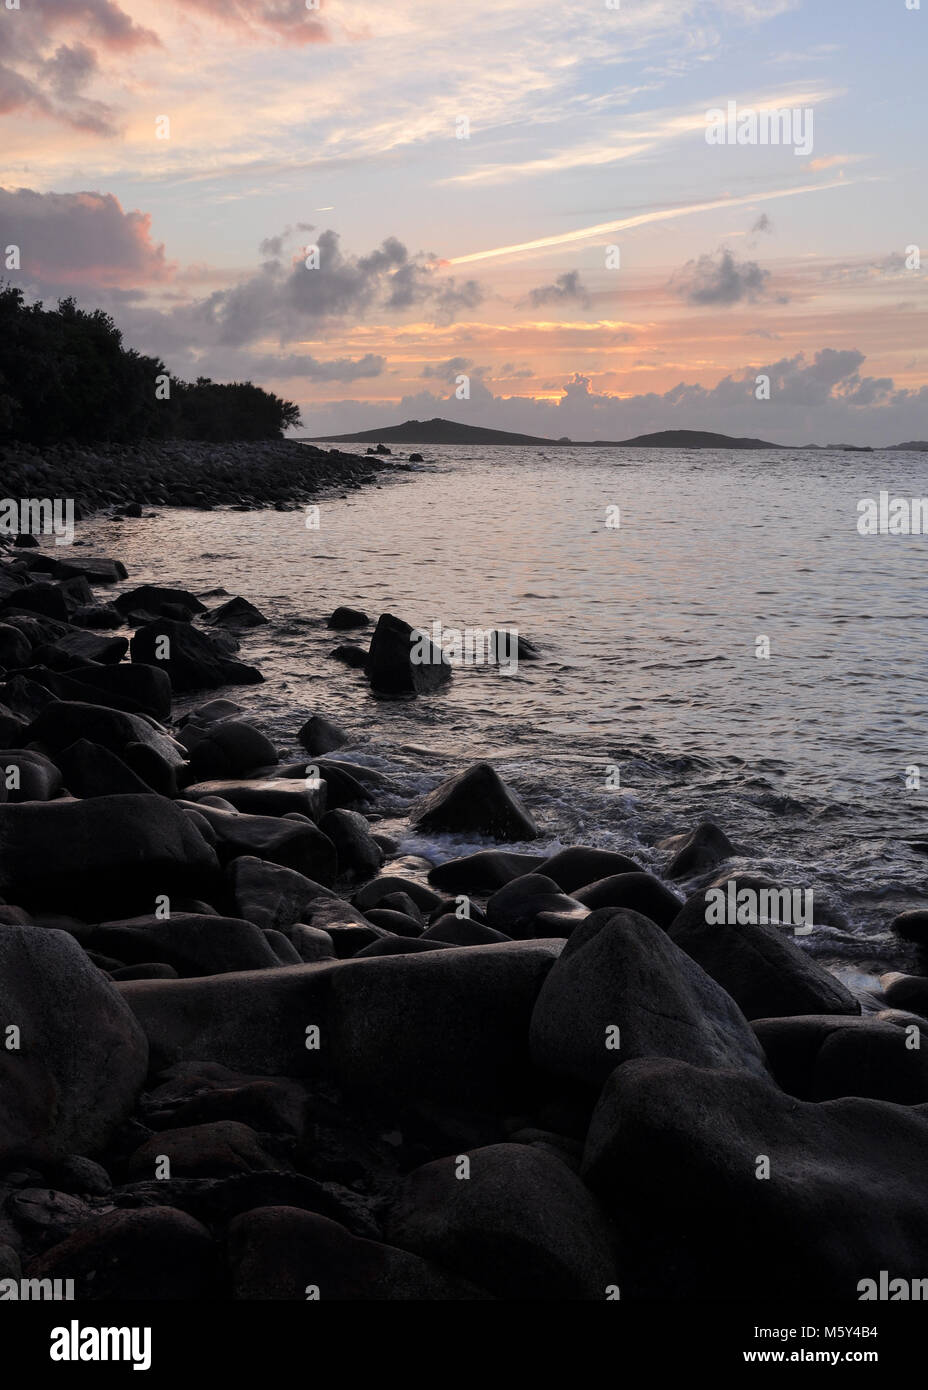 Sunset seascape across rocky coastline. Isles of Scilly, views across the sea to Samson island at sunset. Stock Photo